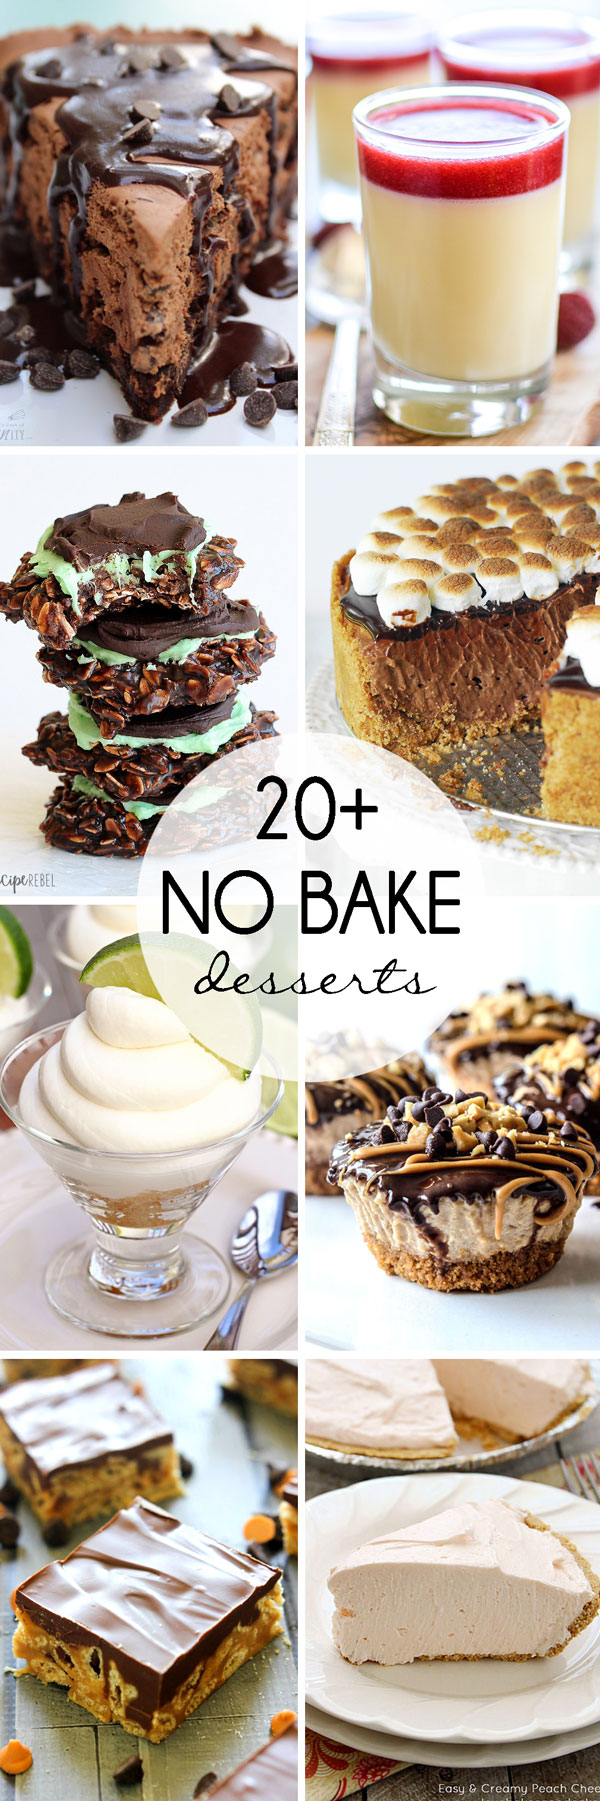 20+ No Bake Desserts that everyone will love! There's a dessert recipe for everyone - fruity desserts, chocolate recipes and even ice cream treats! | The Love Nerds